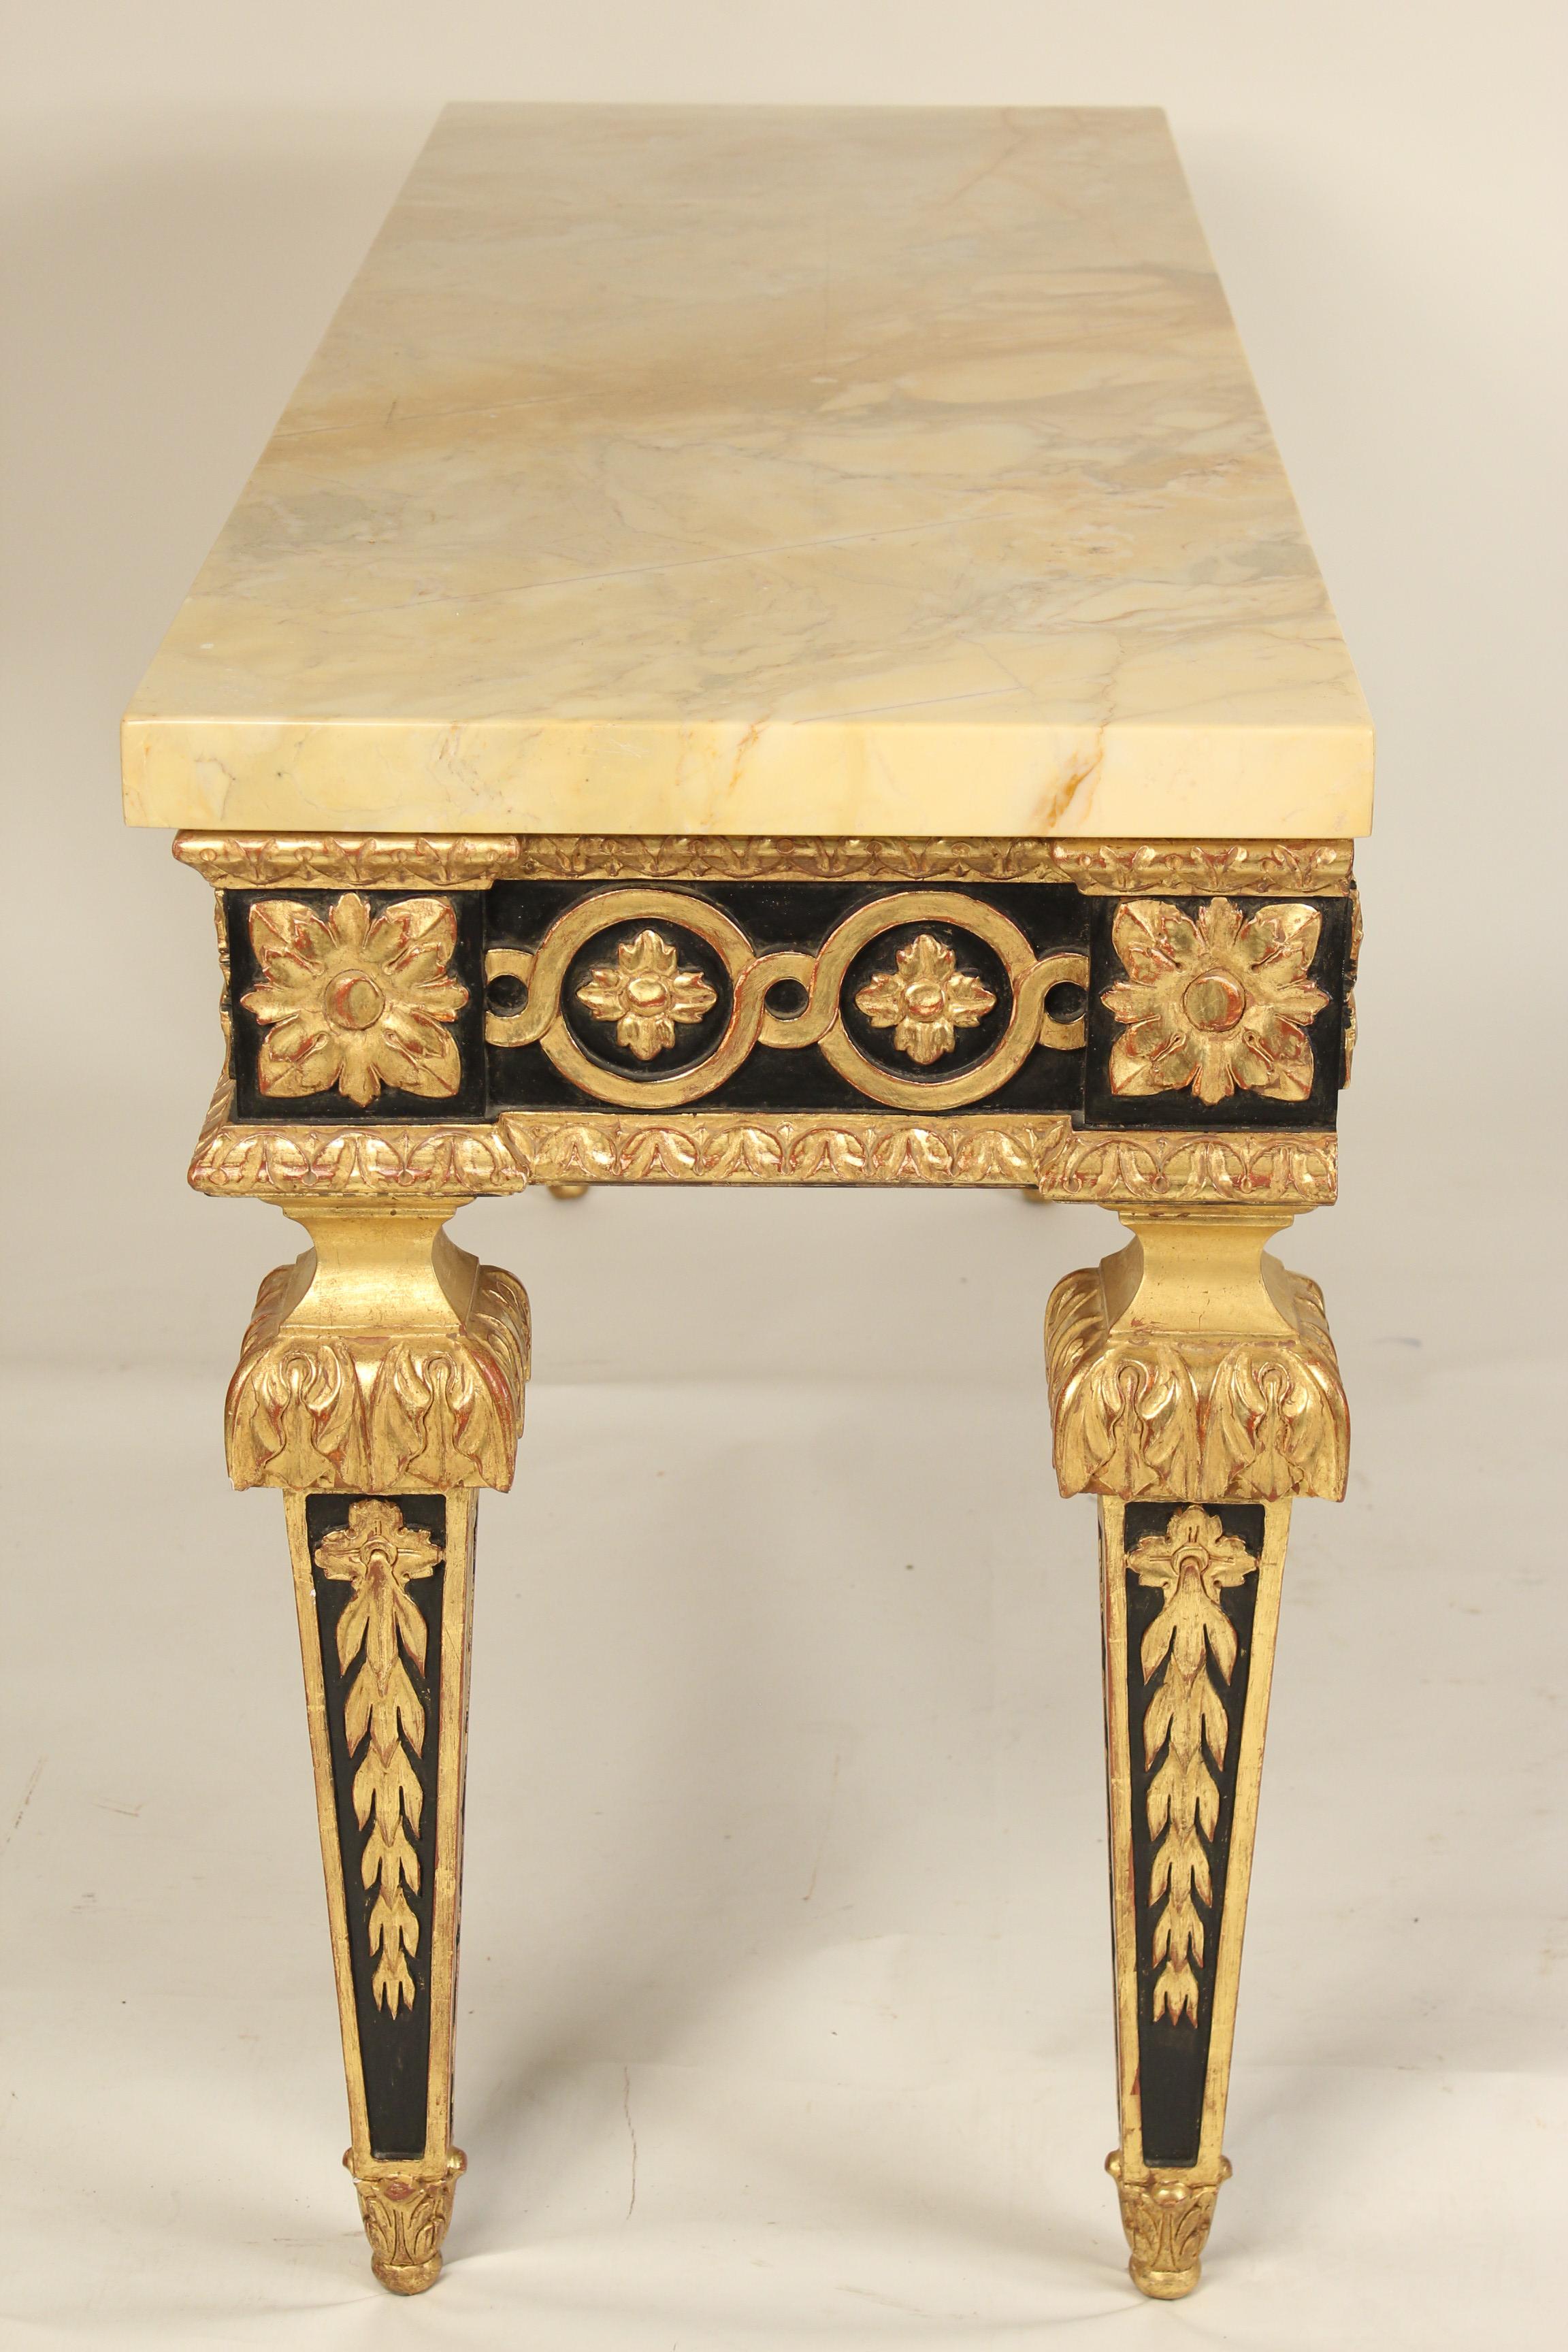 Contemporary Pair of Continental Louis XVI Style Painted and Gilt Decorated Console Tables